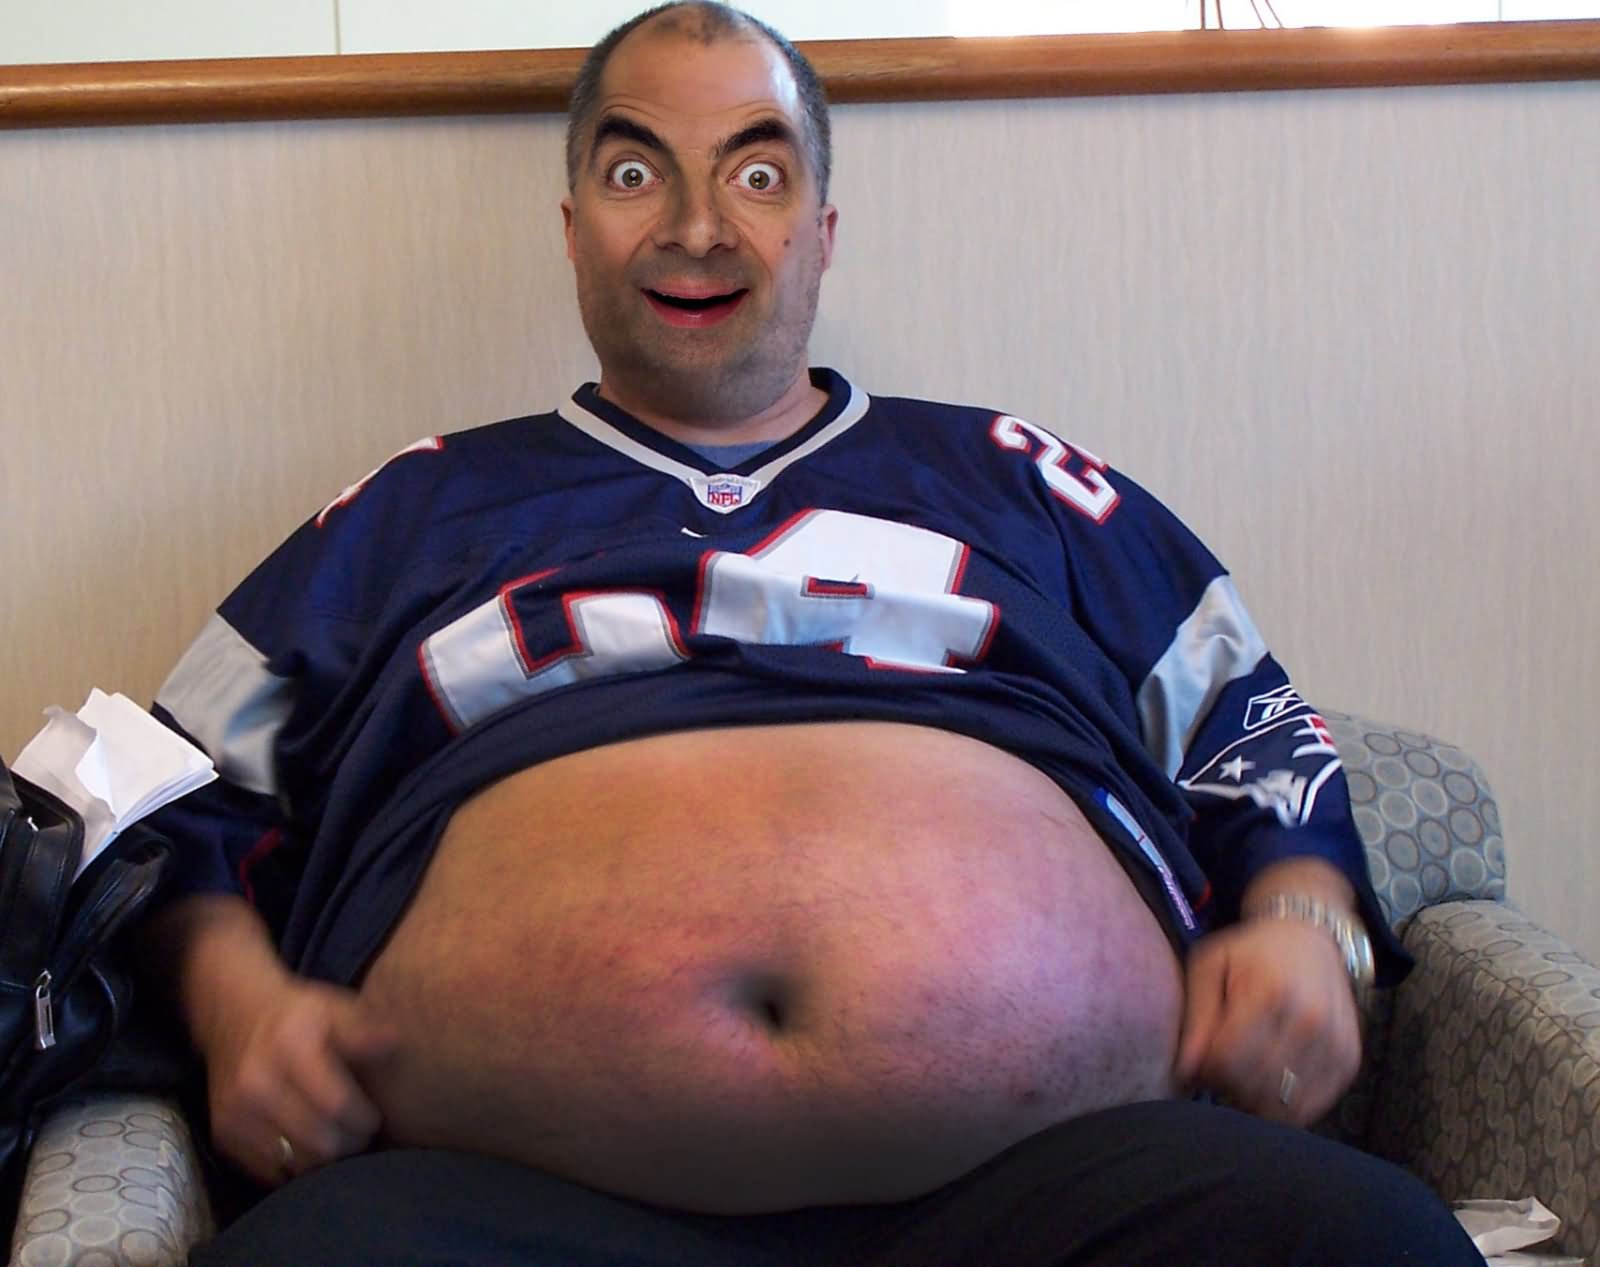 Funny Smiling Mr Bean With Fat Tummy Picture